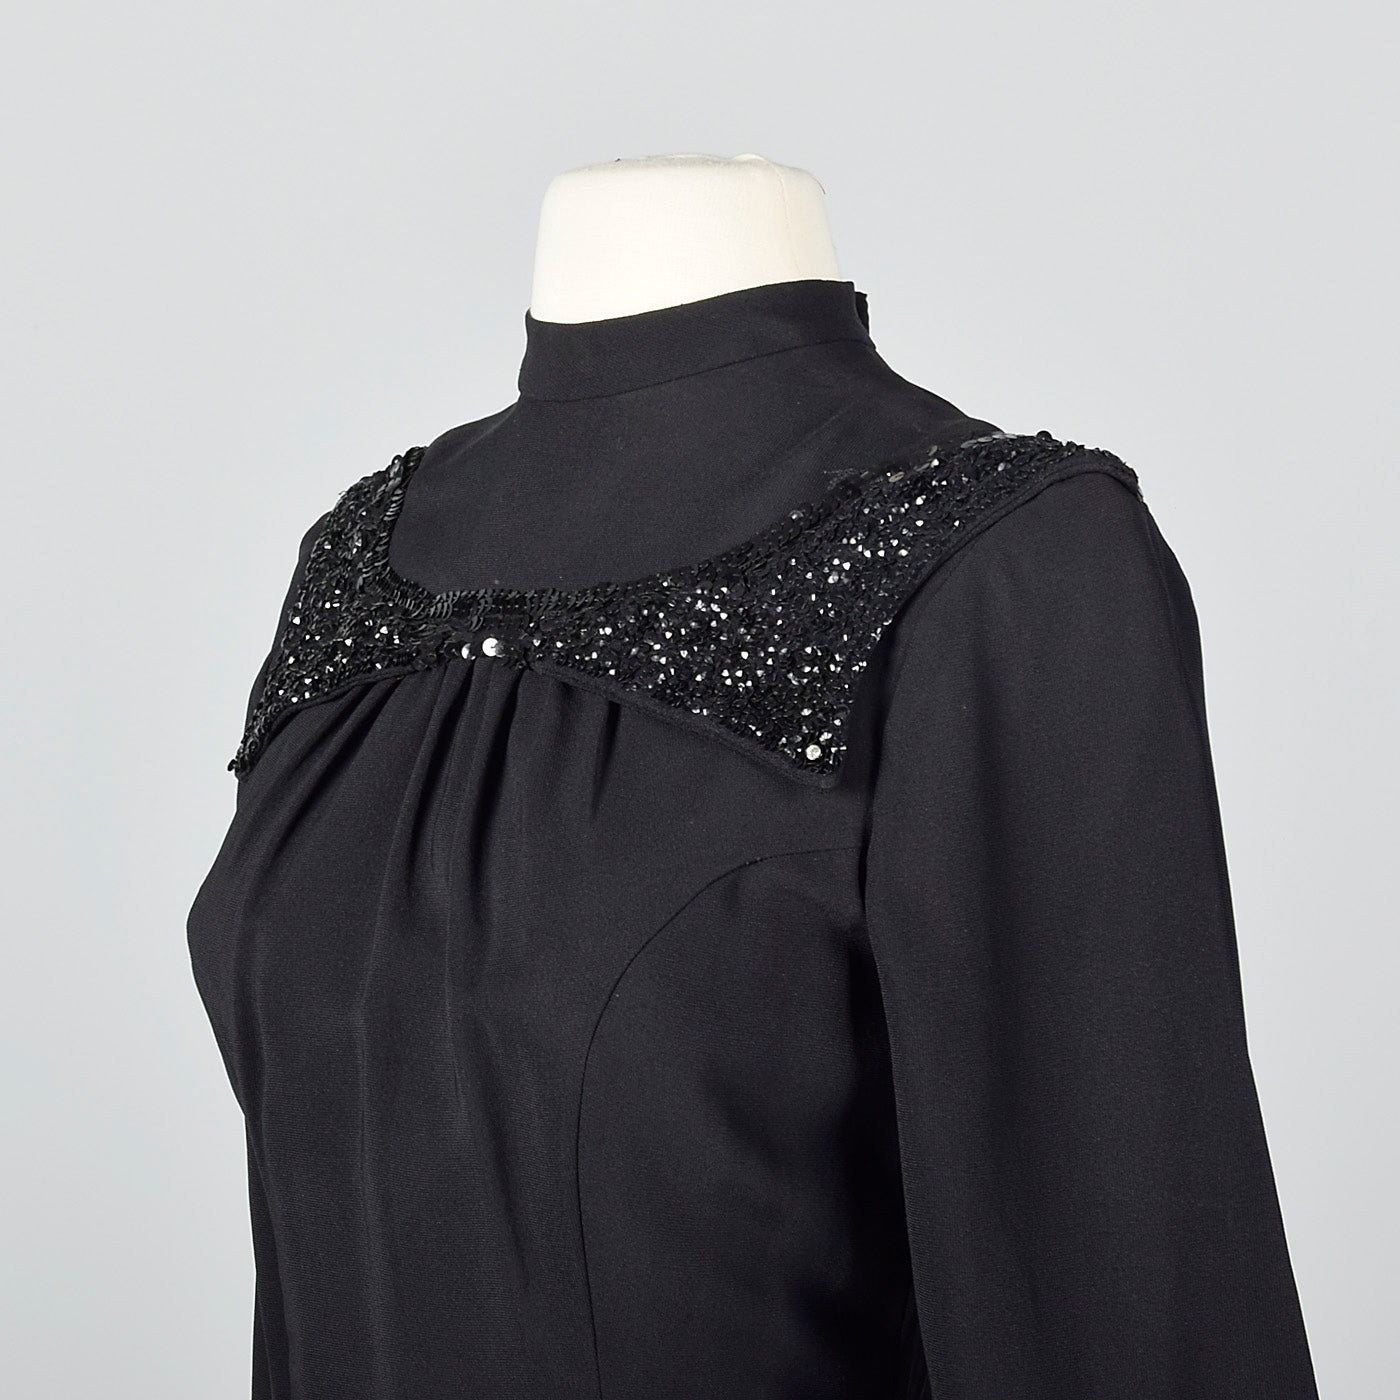 1940s Black Fitted Blouse with Sequin Trim